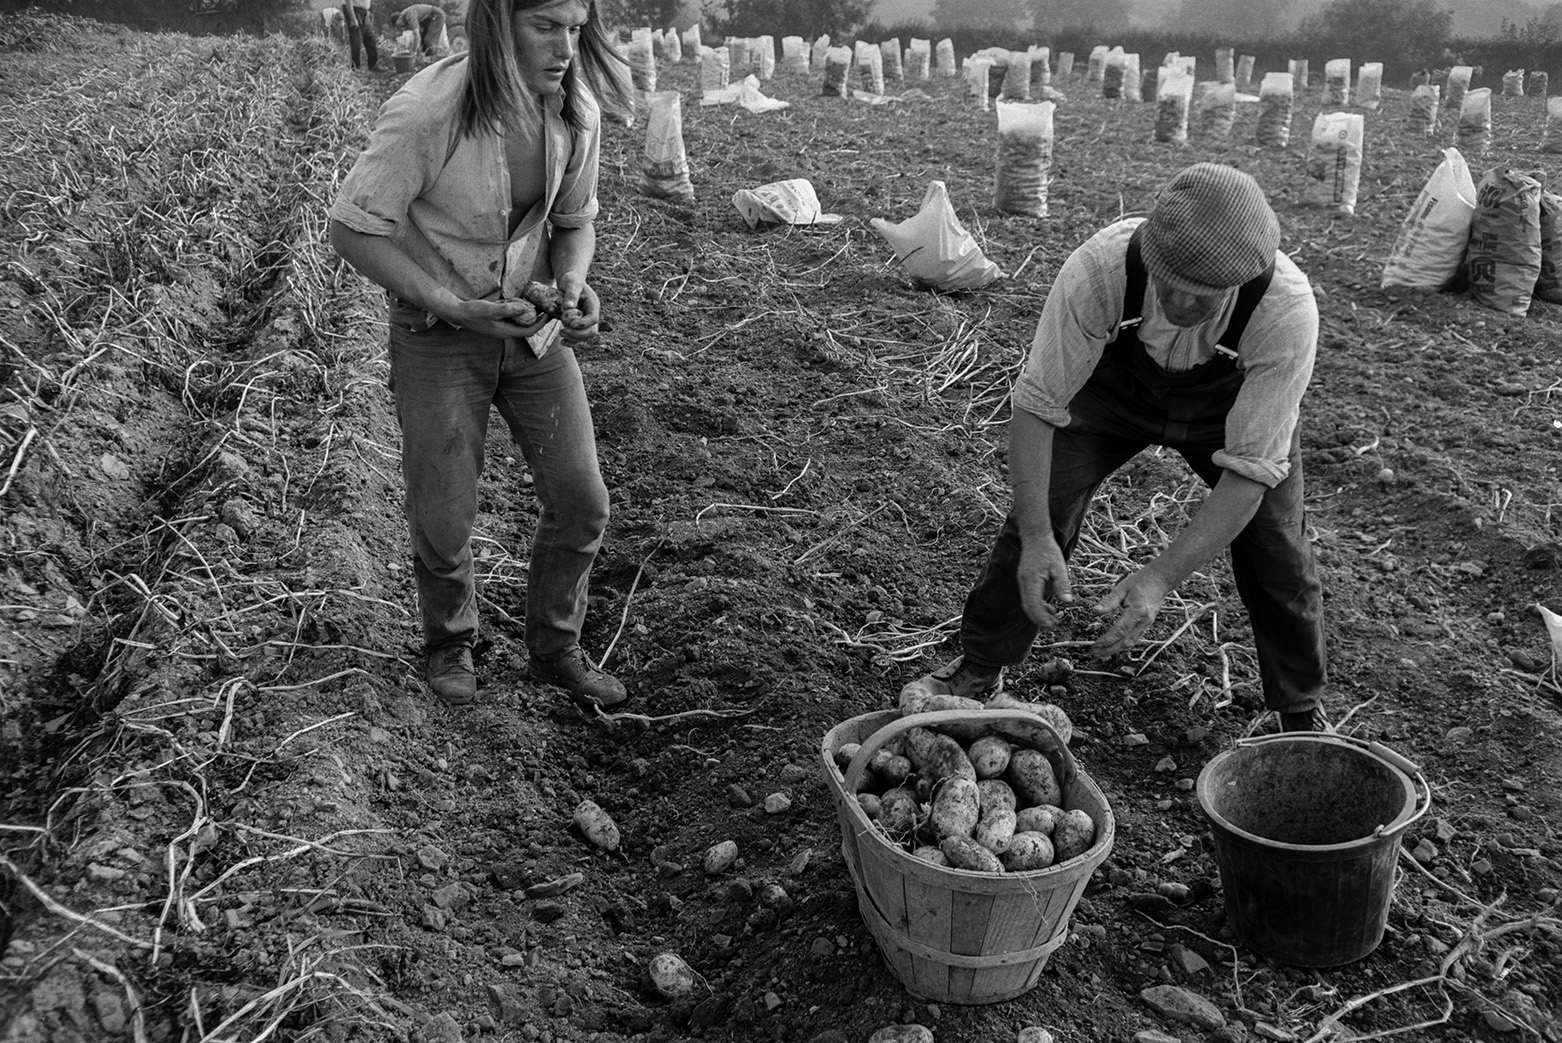 Derek Bright, on the left, and other men harvesting a potato crop in a field at Mill Road Farm, Beaford. They are filling a trug in the foreground, and sacks of potatoes can be seen in the background. The farm was also known as Jeffrys.